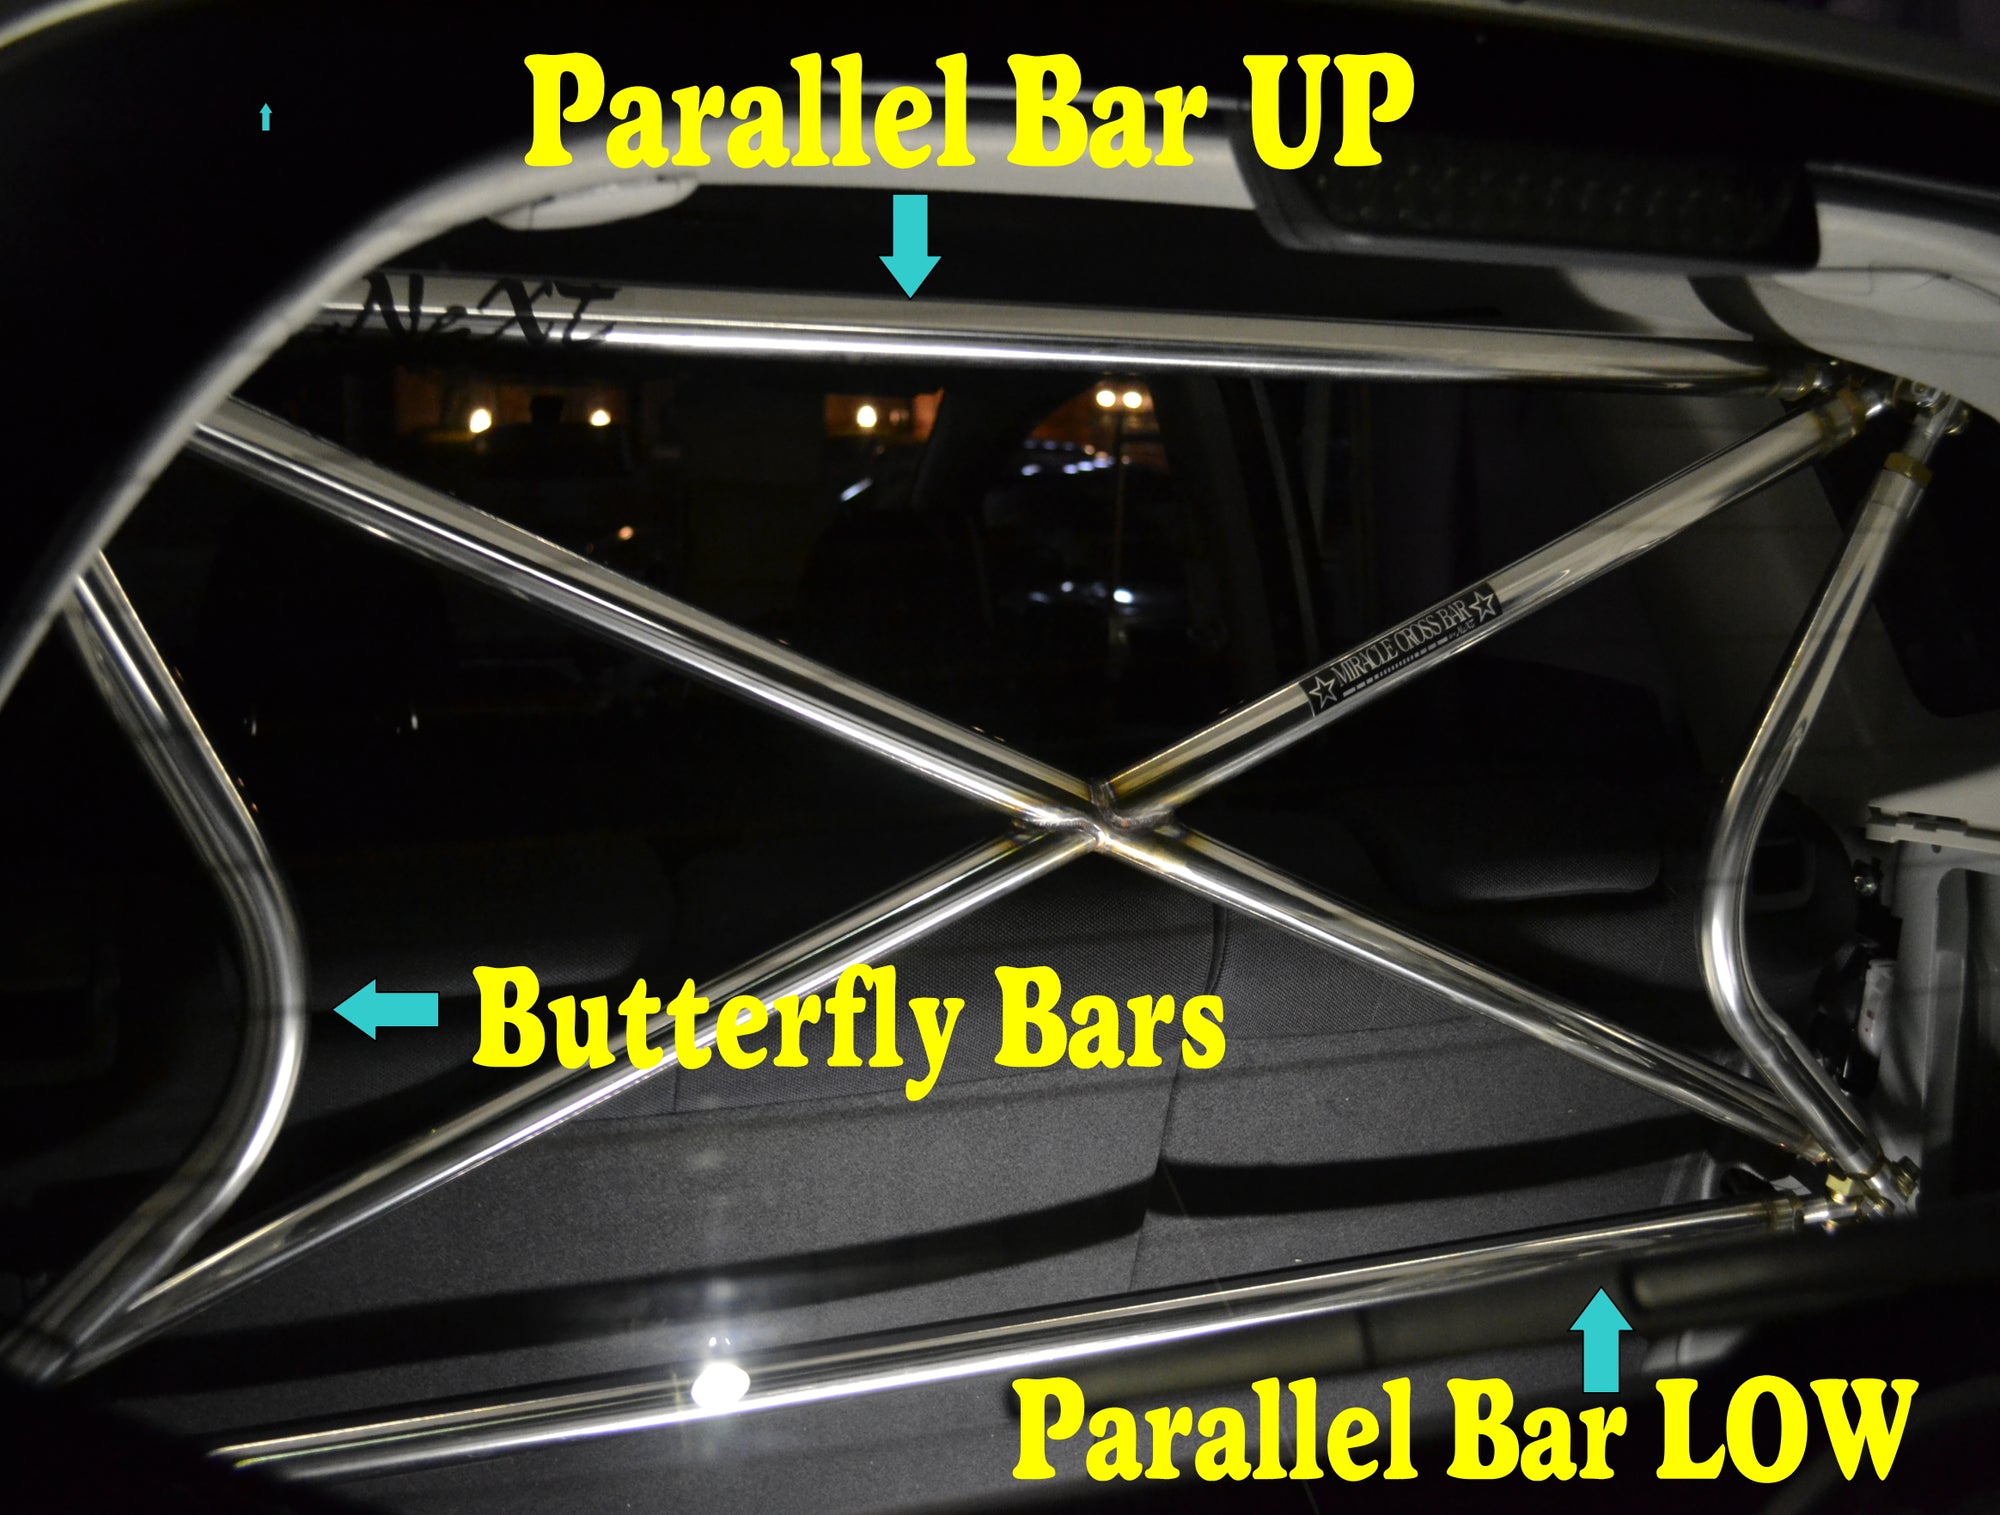 NEXT MIRACLE CROSS BAR BUTTERFLY BAR RIGHT & LEFT STAINLESS 35 FOR MITSUBISHI LANCER EVOLUTION 4 5 6 NEXT-01265